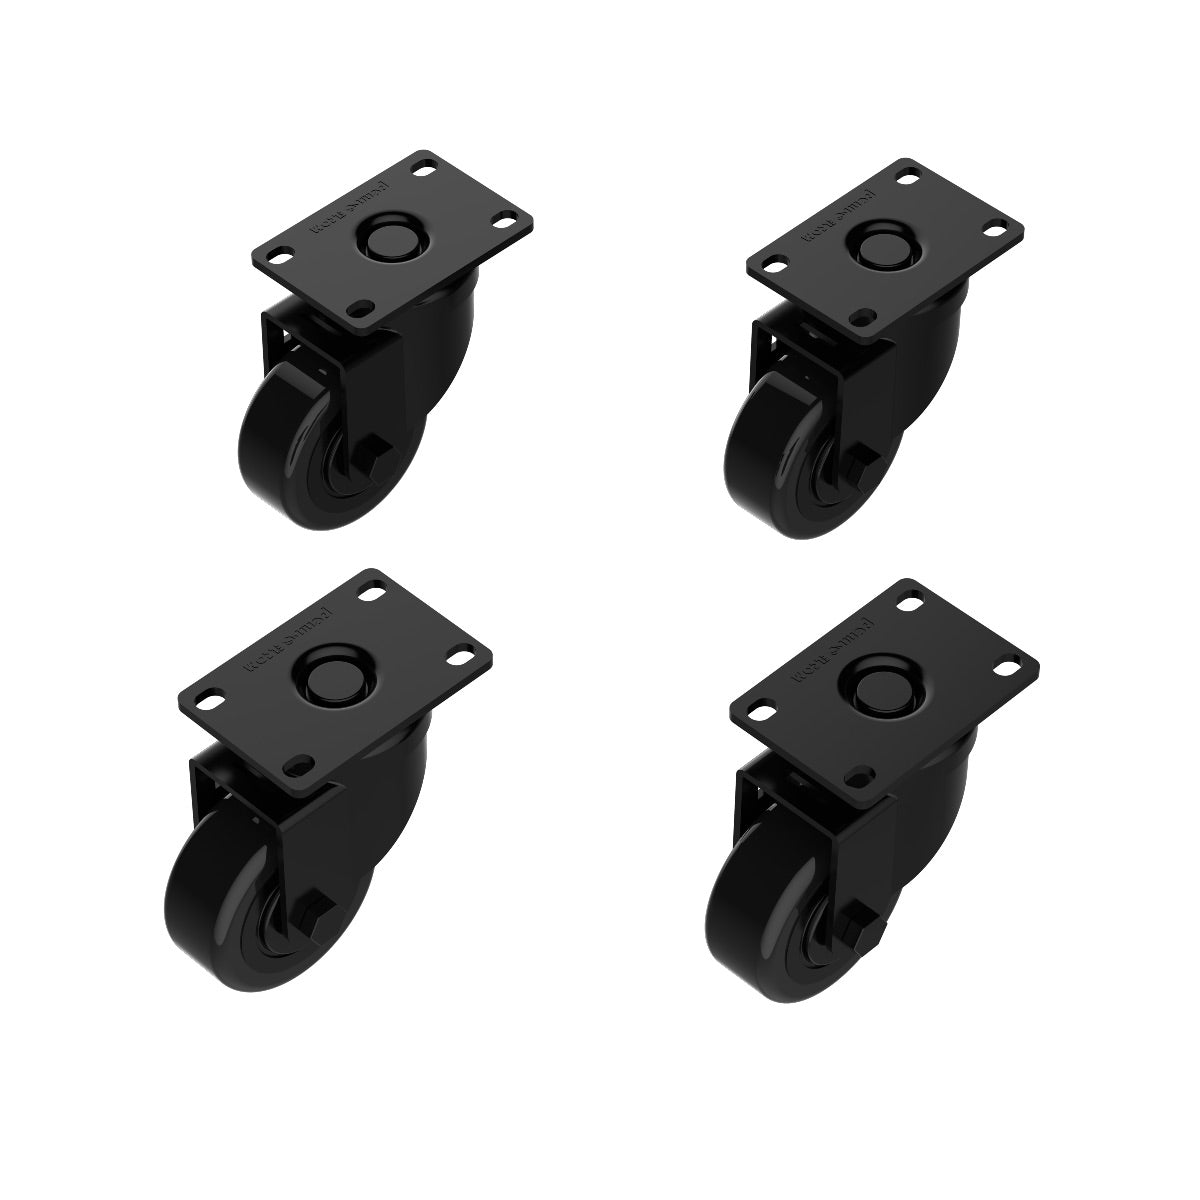 JBL ACK1 - Accessory Caster Kit for compatible JBL products